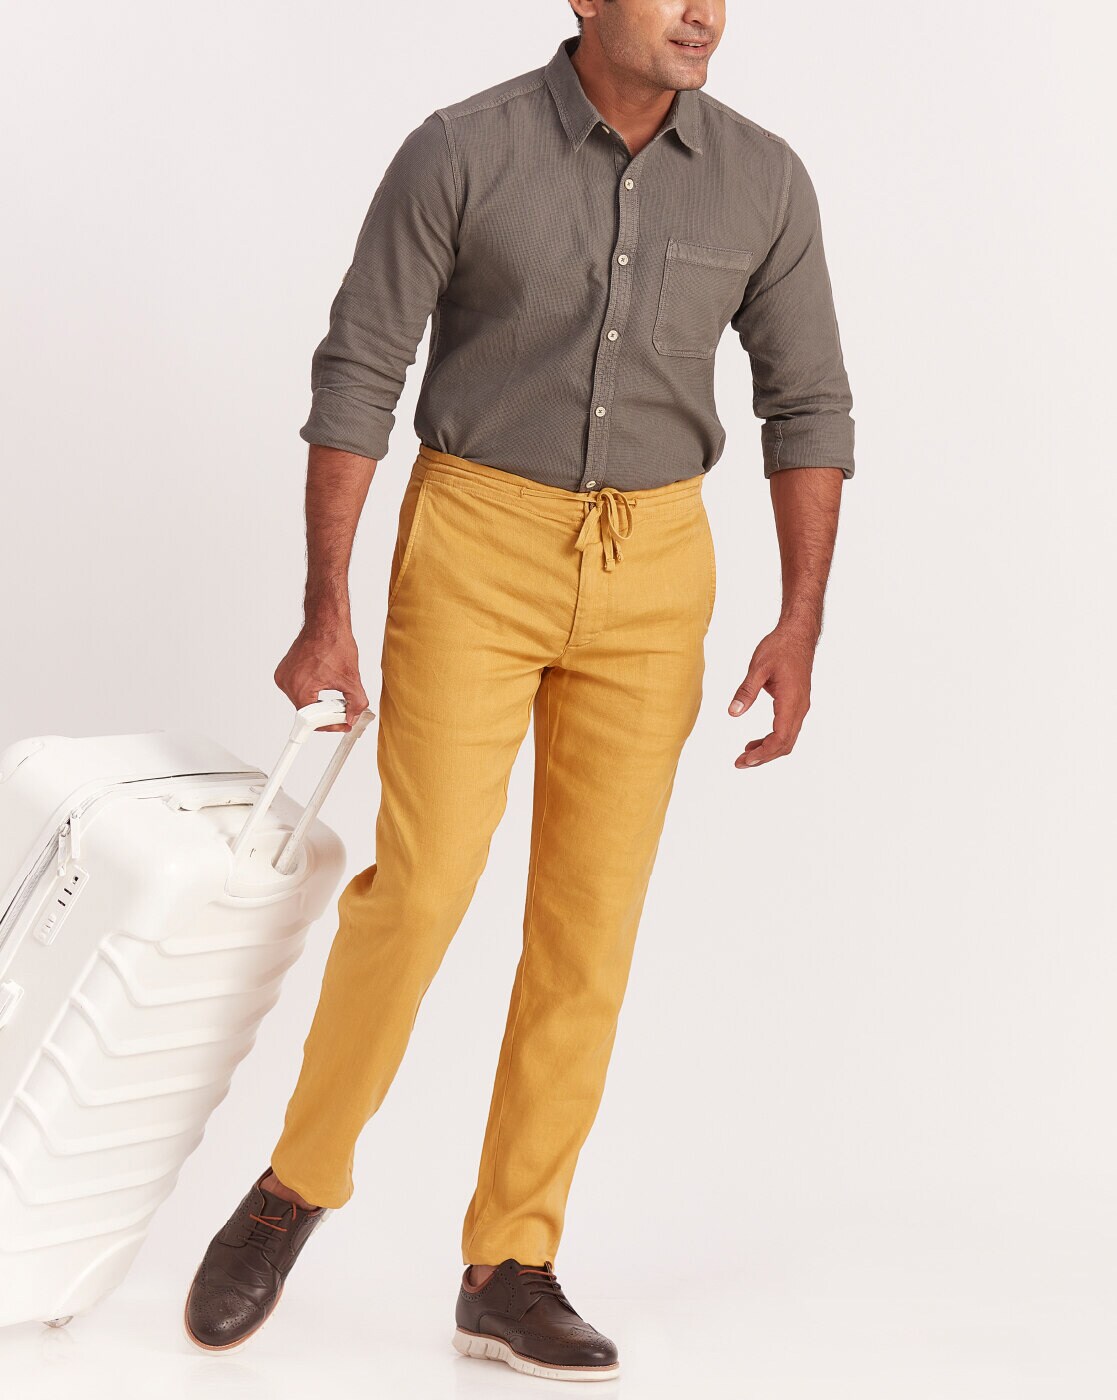 How to Wear Mustard Pants  Search for Mustard Pants  Chictopia